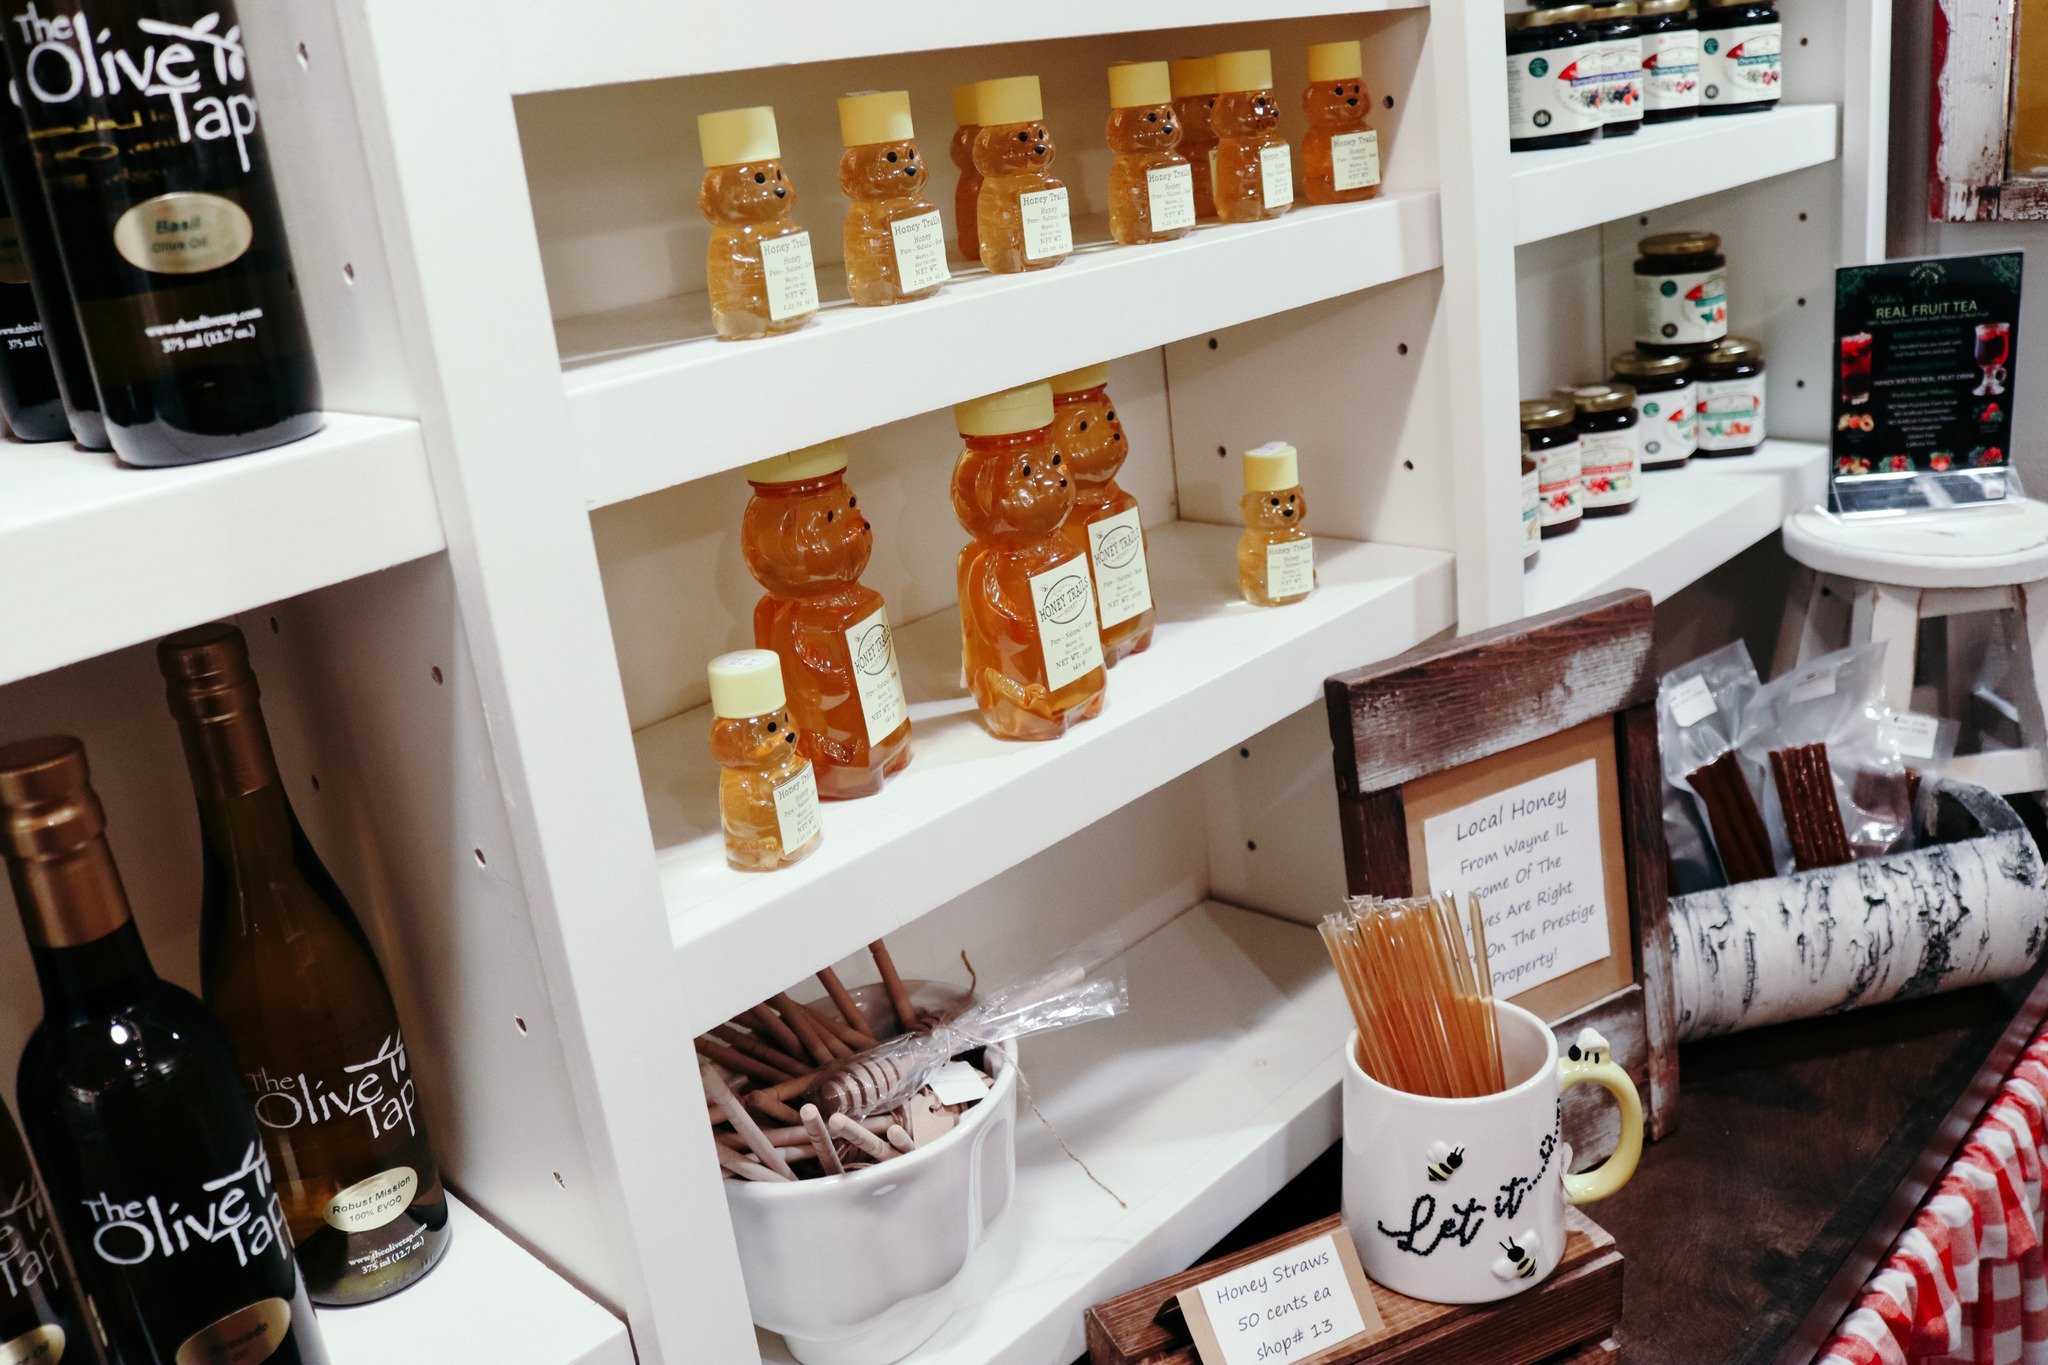 HEY THERE, HONEY! 🍯

Did you know we sell local Honey Trails honey from Wayne, IL in our market? You can find it in our Country Biscuit General Store! Don't forget to snag some local seasoning rubs or a delicious bottle of olive oil, too. We are ope